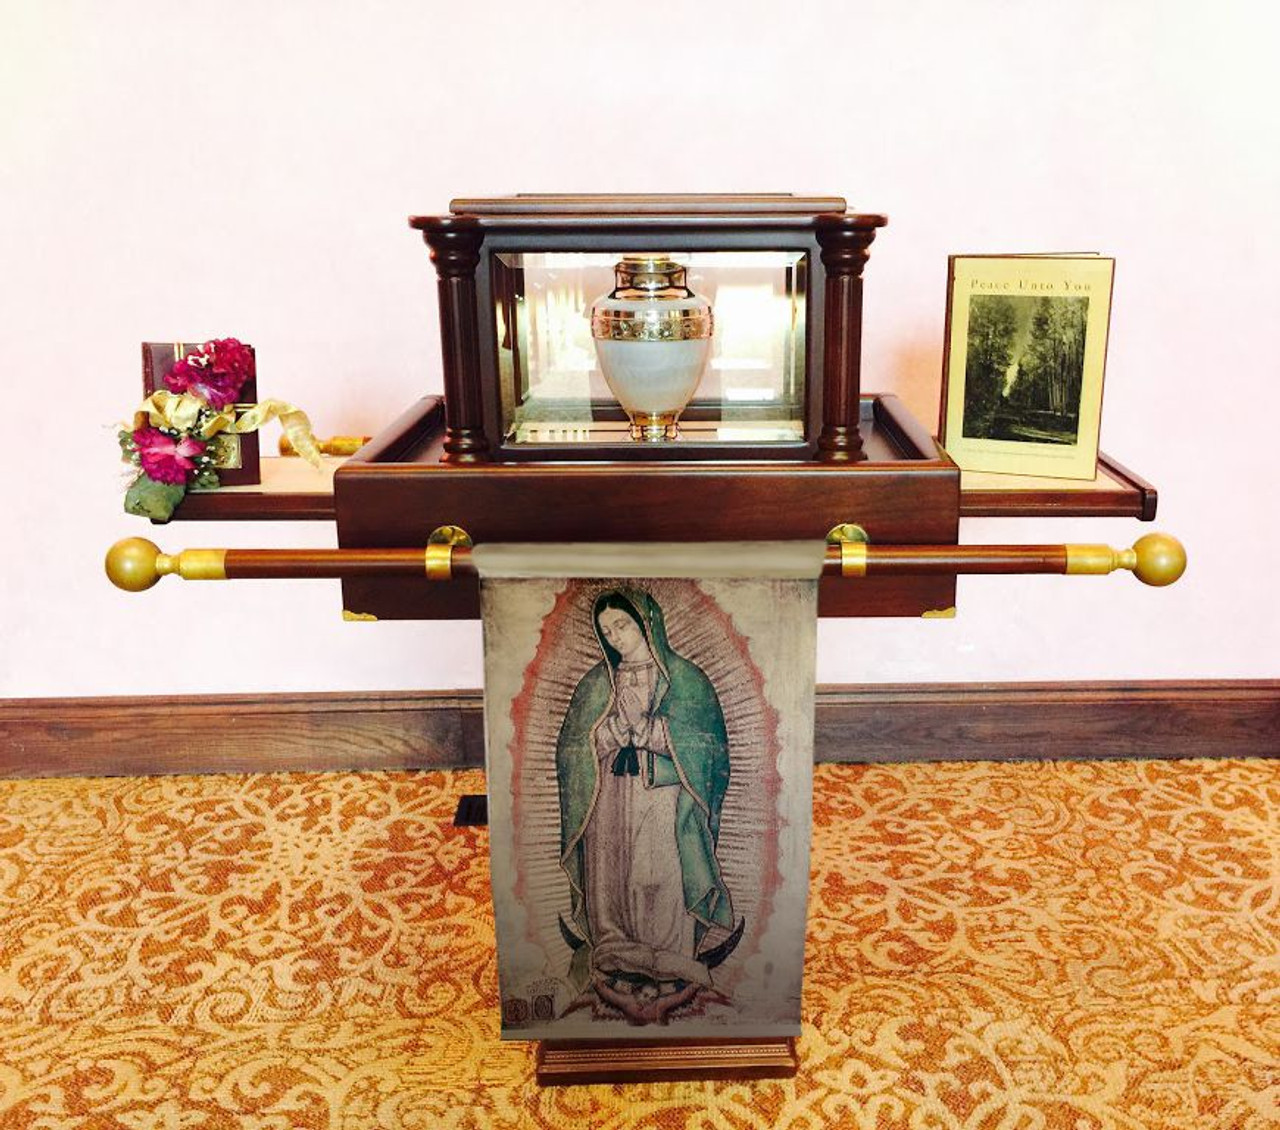 Our Lady of Guadalupe Tilma reproduction, half size of original tilma, at funeral